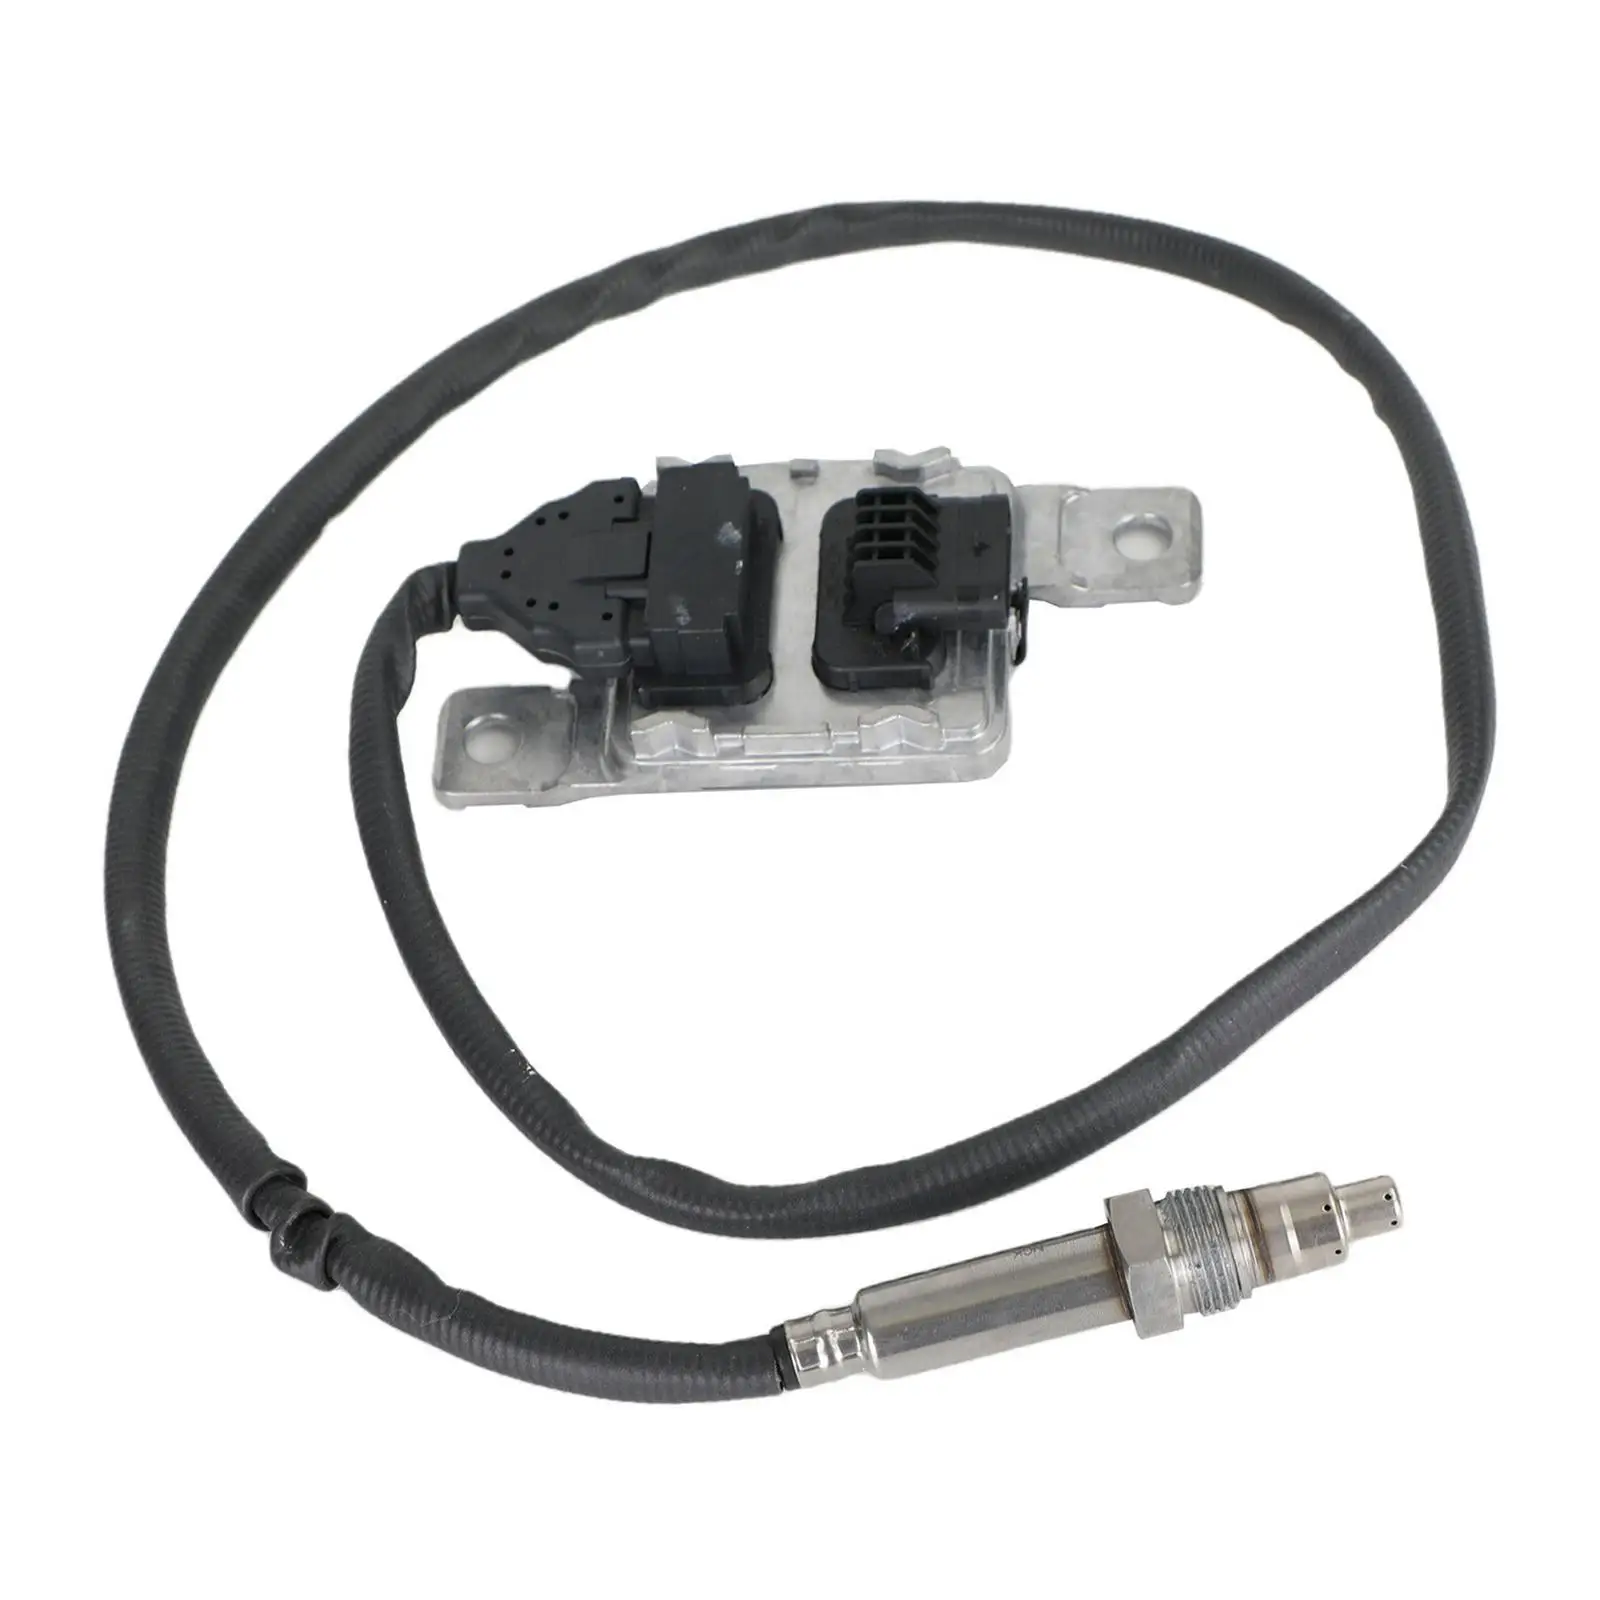 2 Sensor 059907807AA Car Part Direct Replaces, Accessories 95860680703 Replace  5WK97229 for   2015-2018